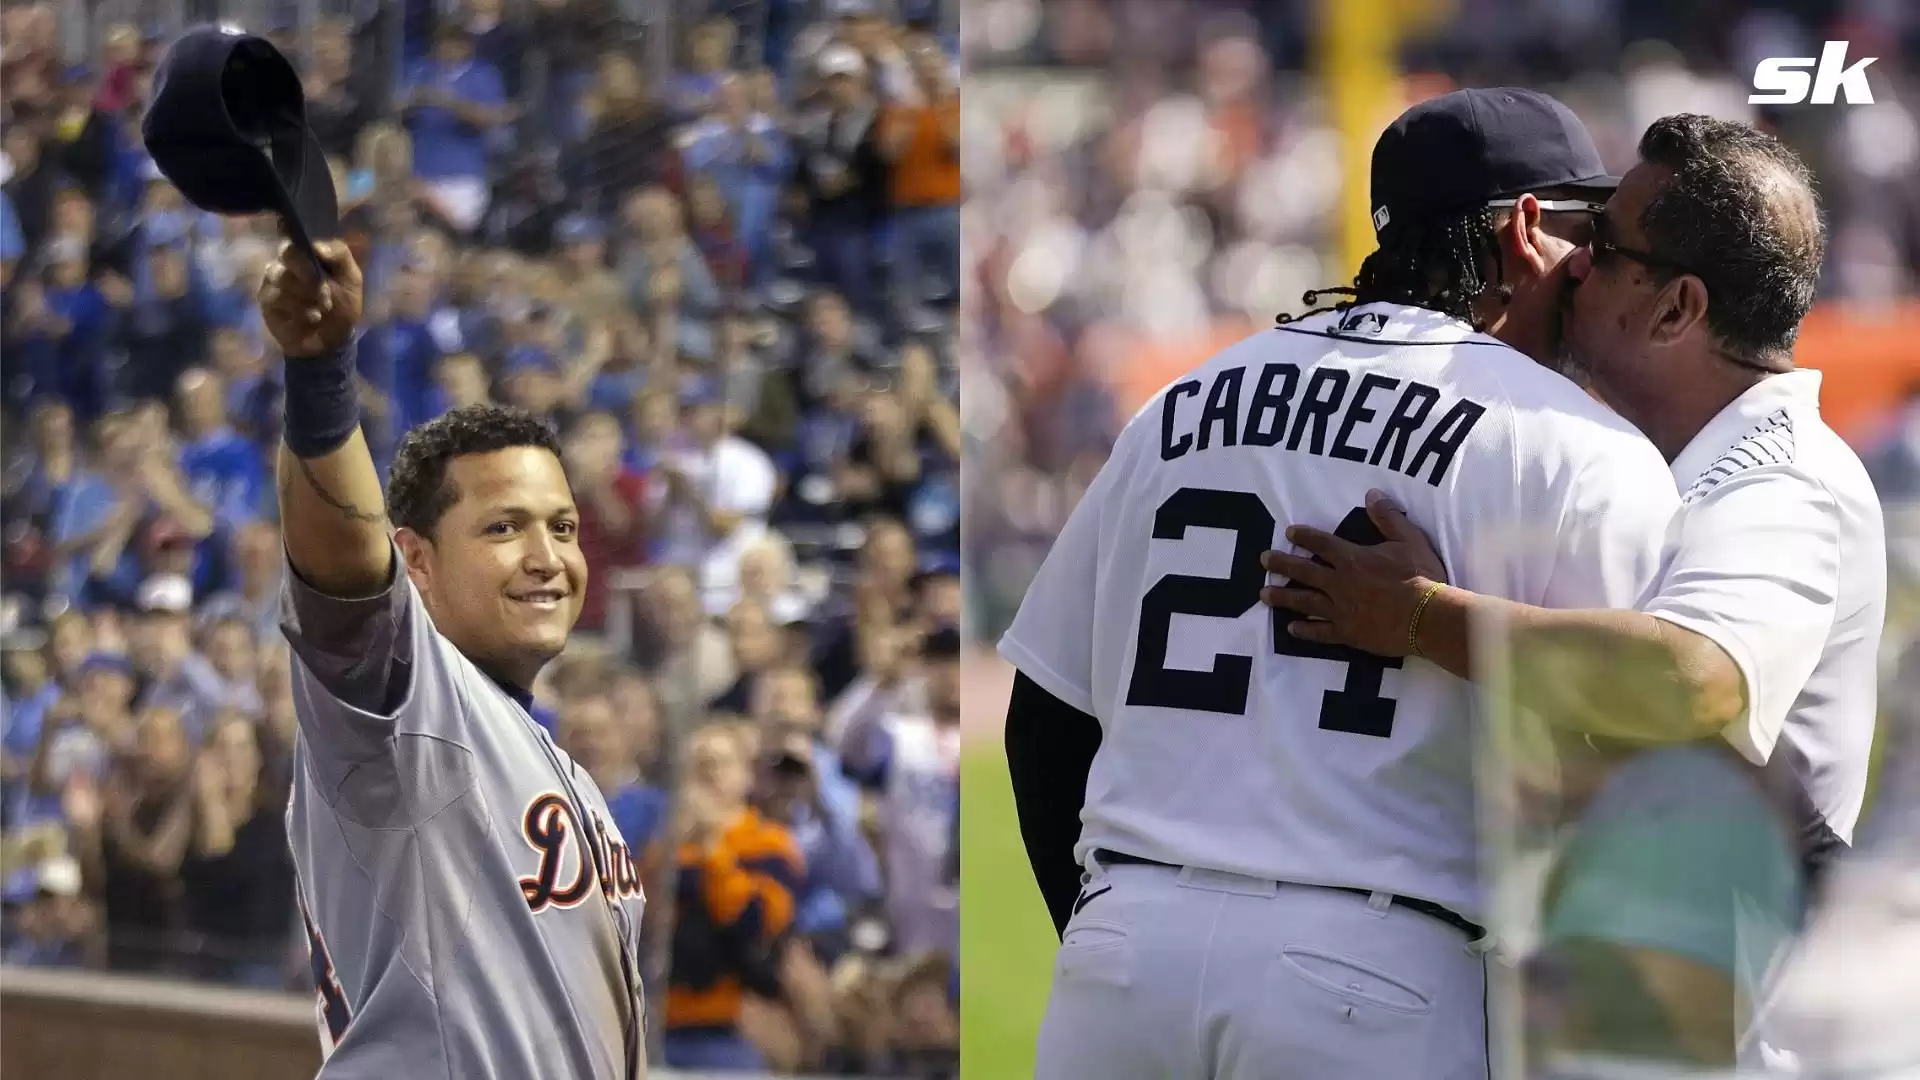 MLB Fans React to Detroit Tigers Giving Miguel Cabrera Career Milestone Jordan Cleats as a Retirement Gift